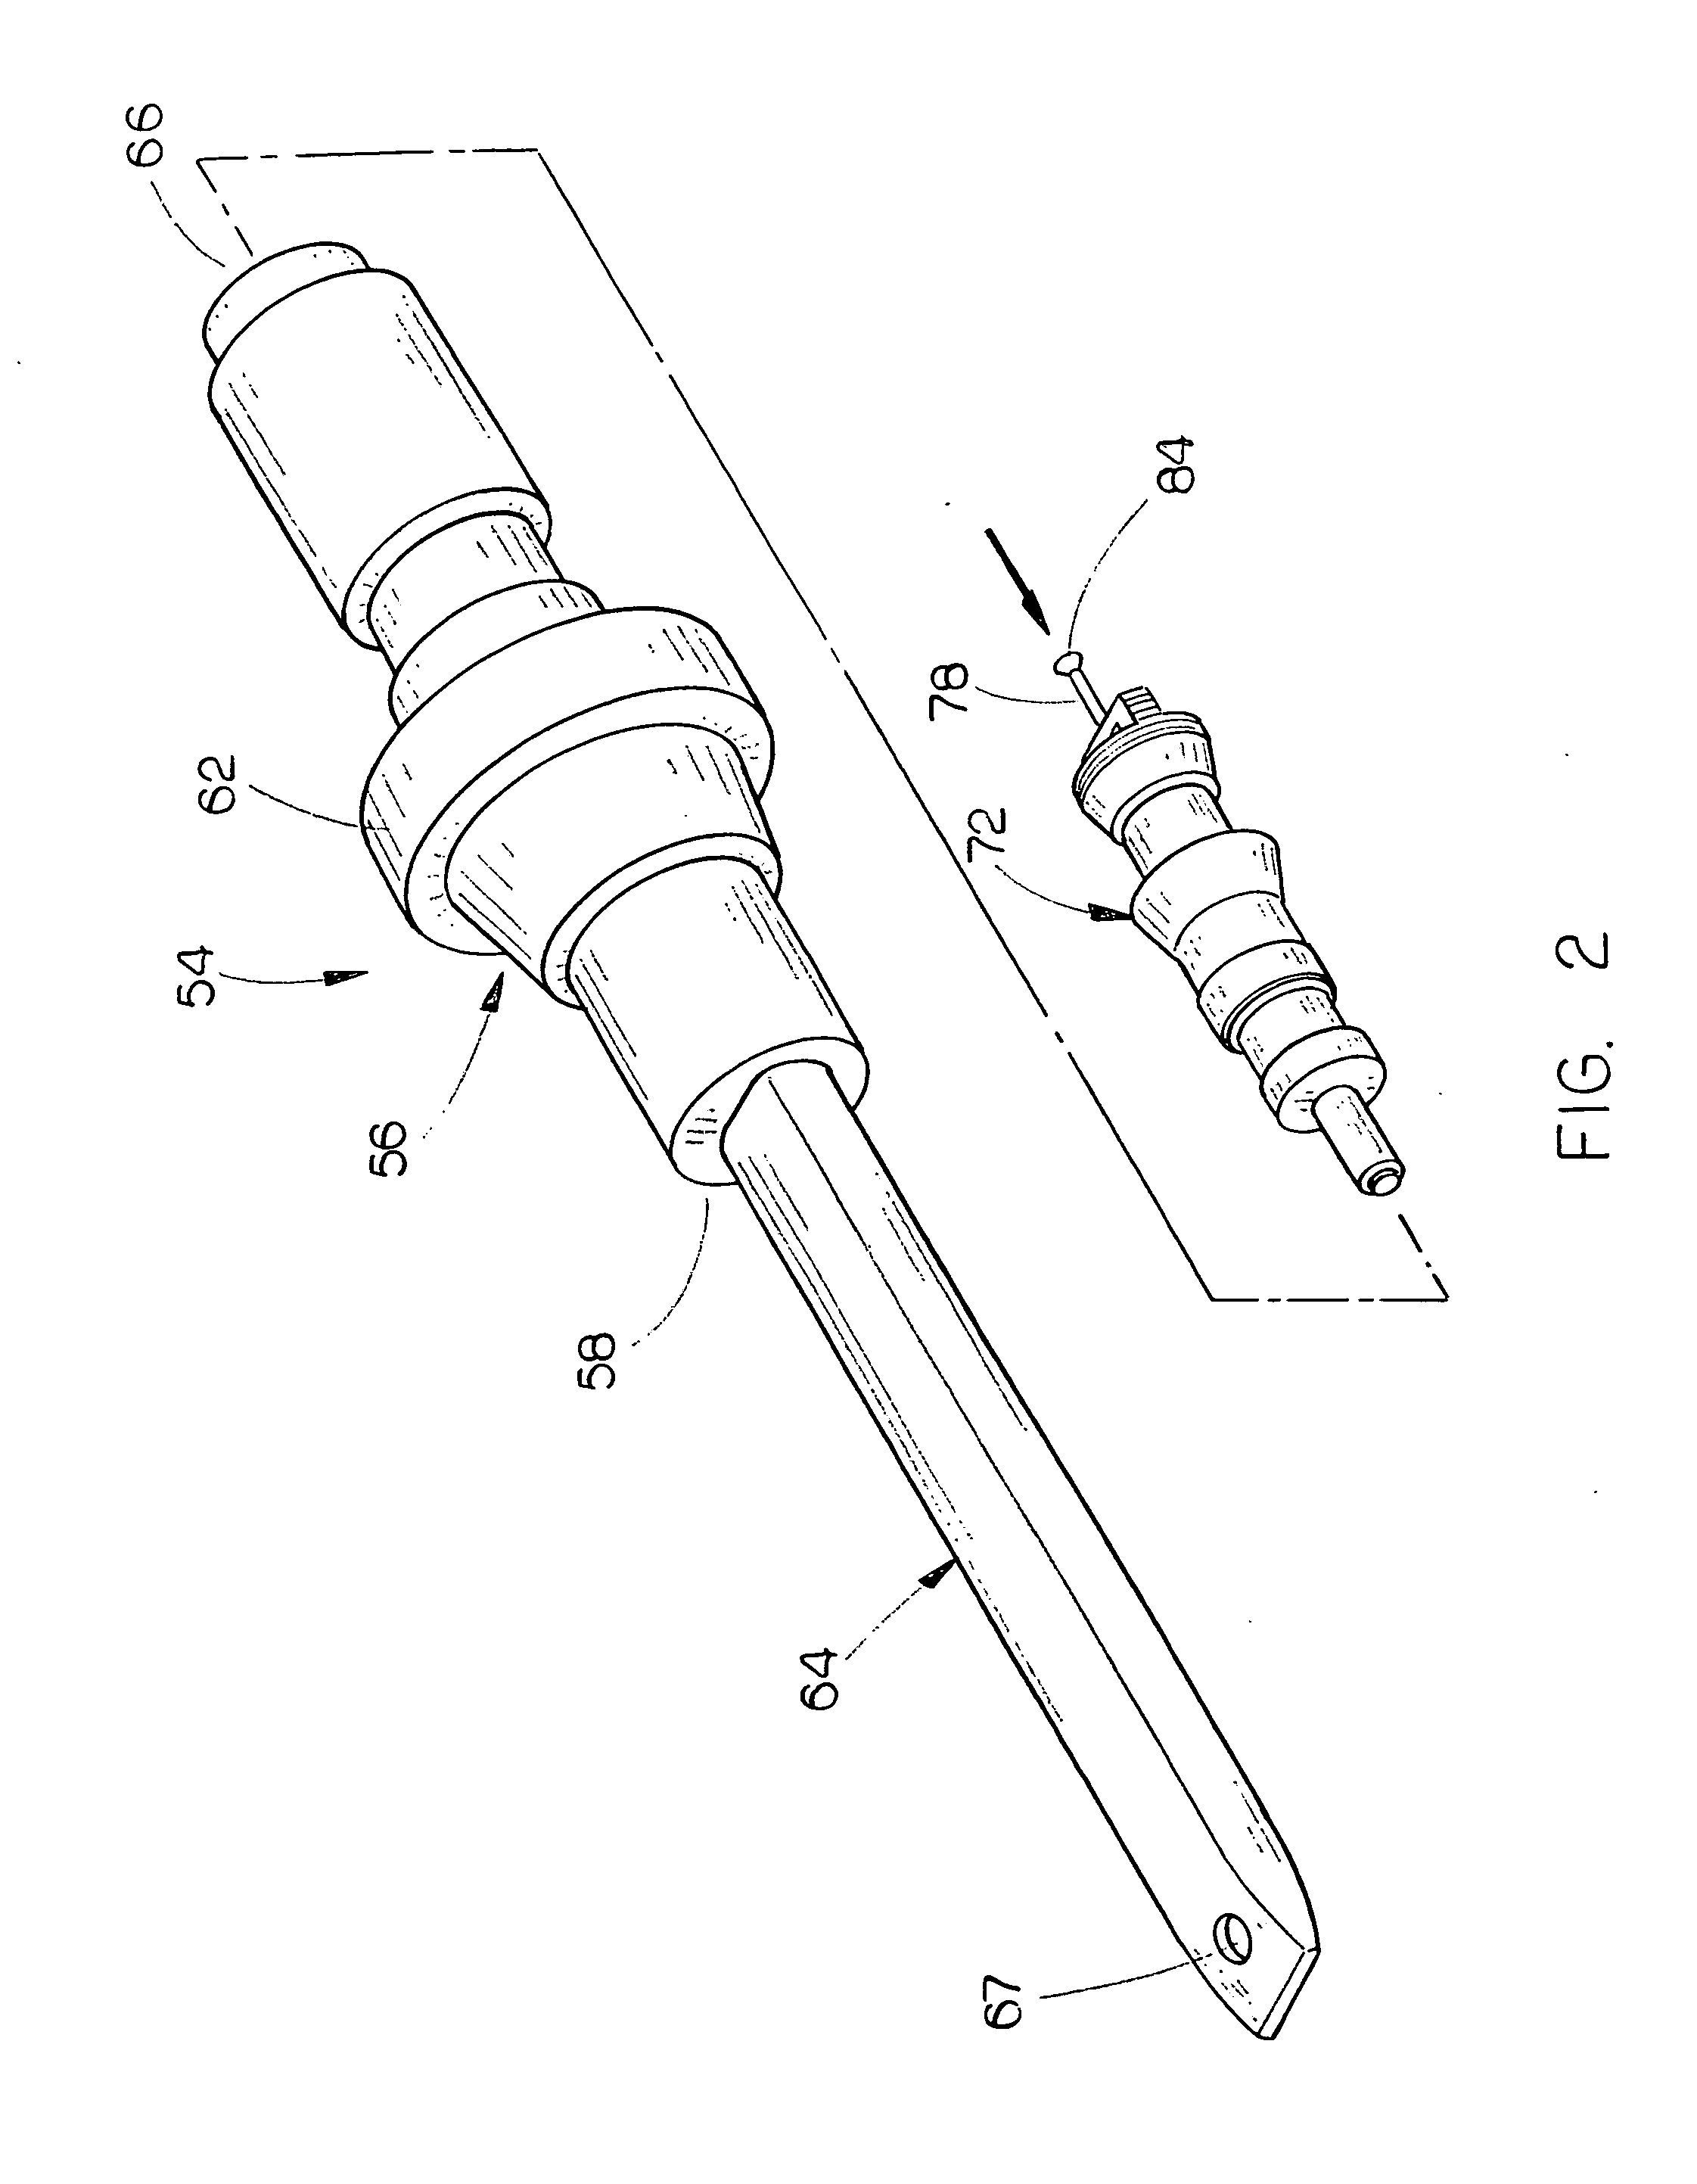 Injection tip for use with an injector for injecting liquid chemical into a tree